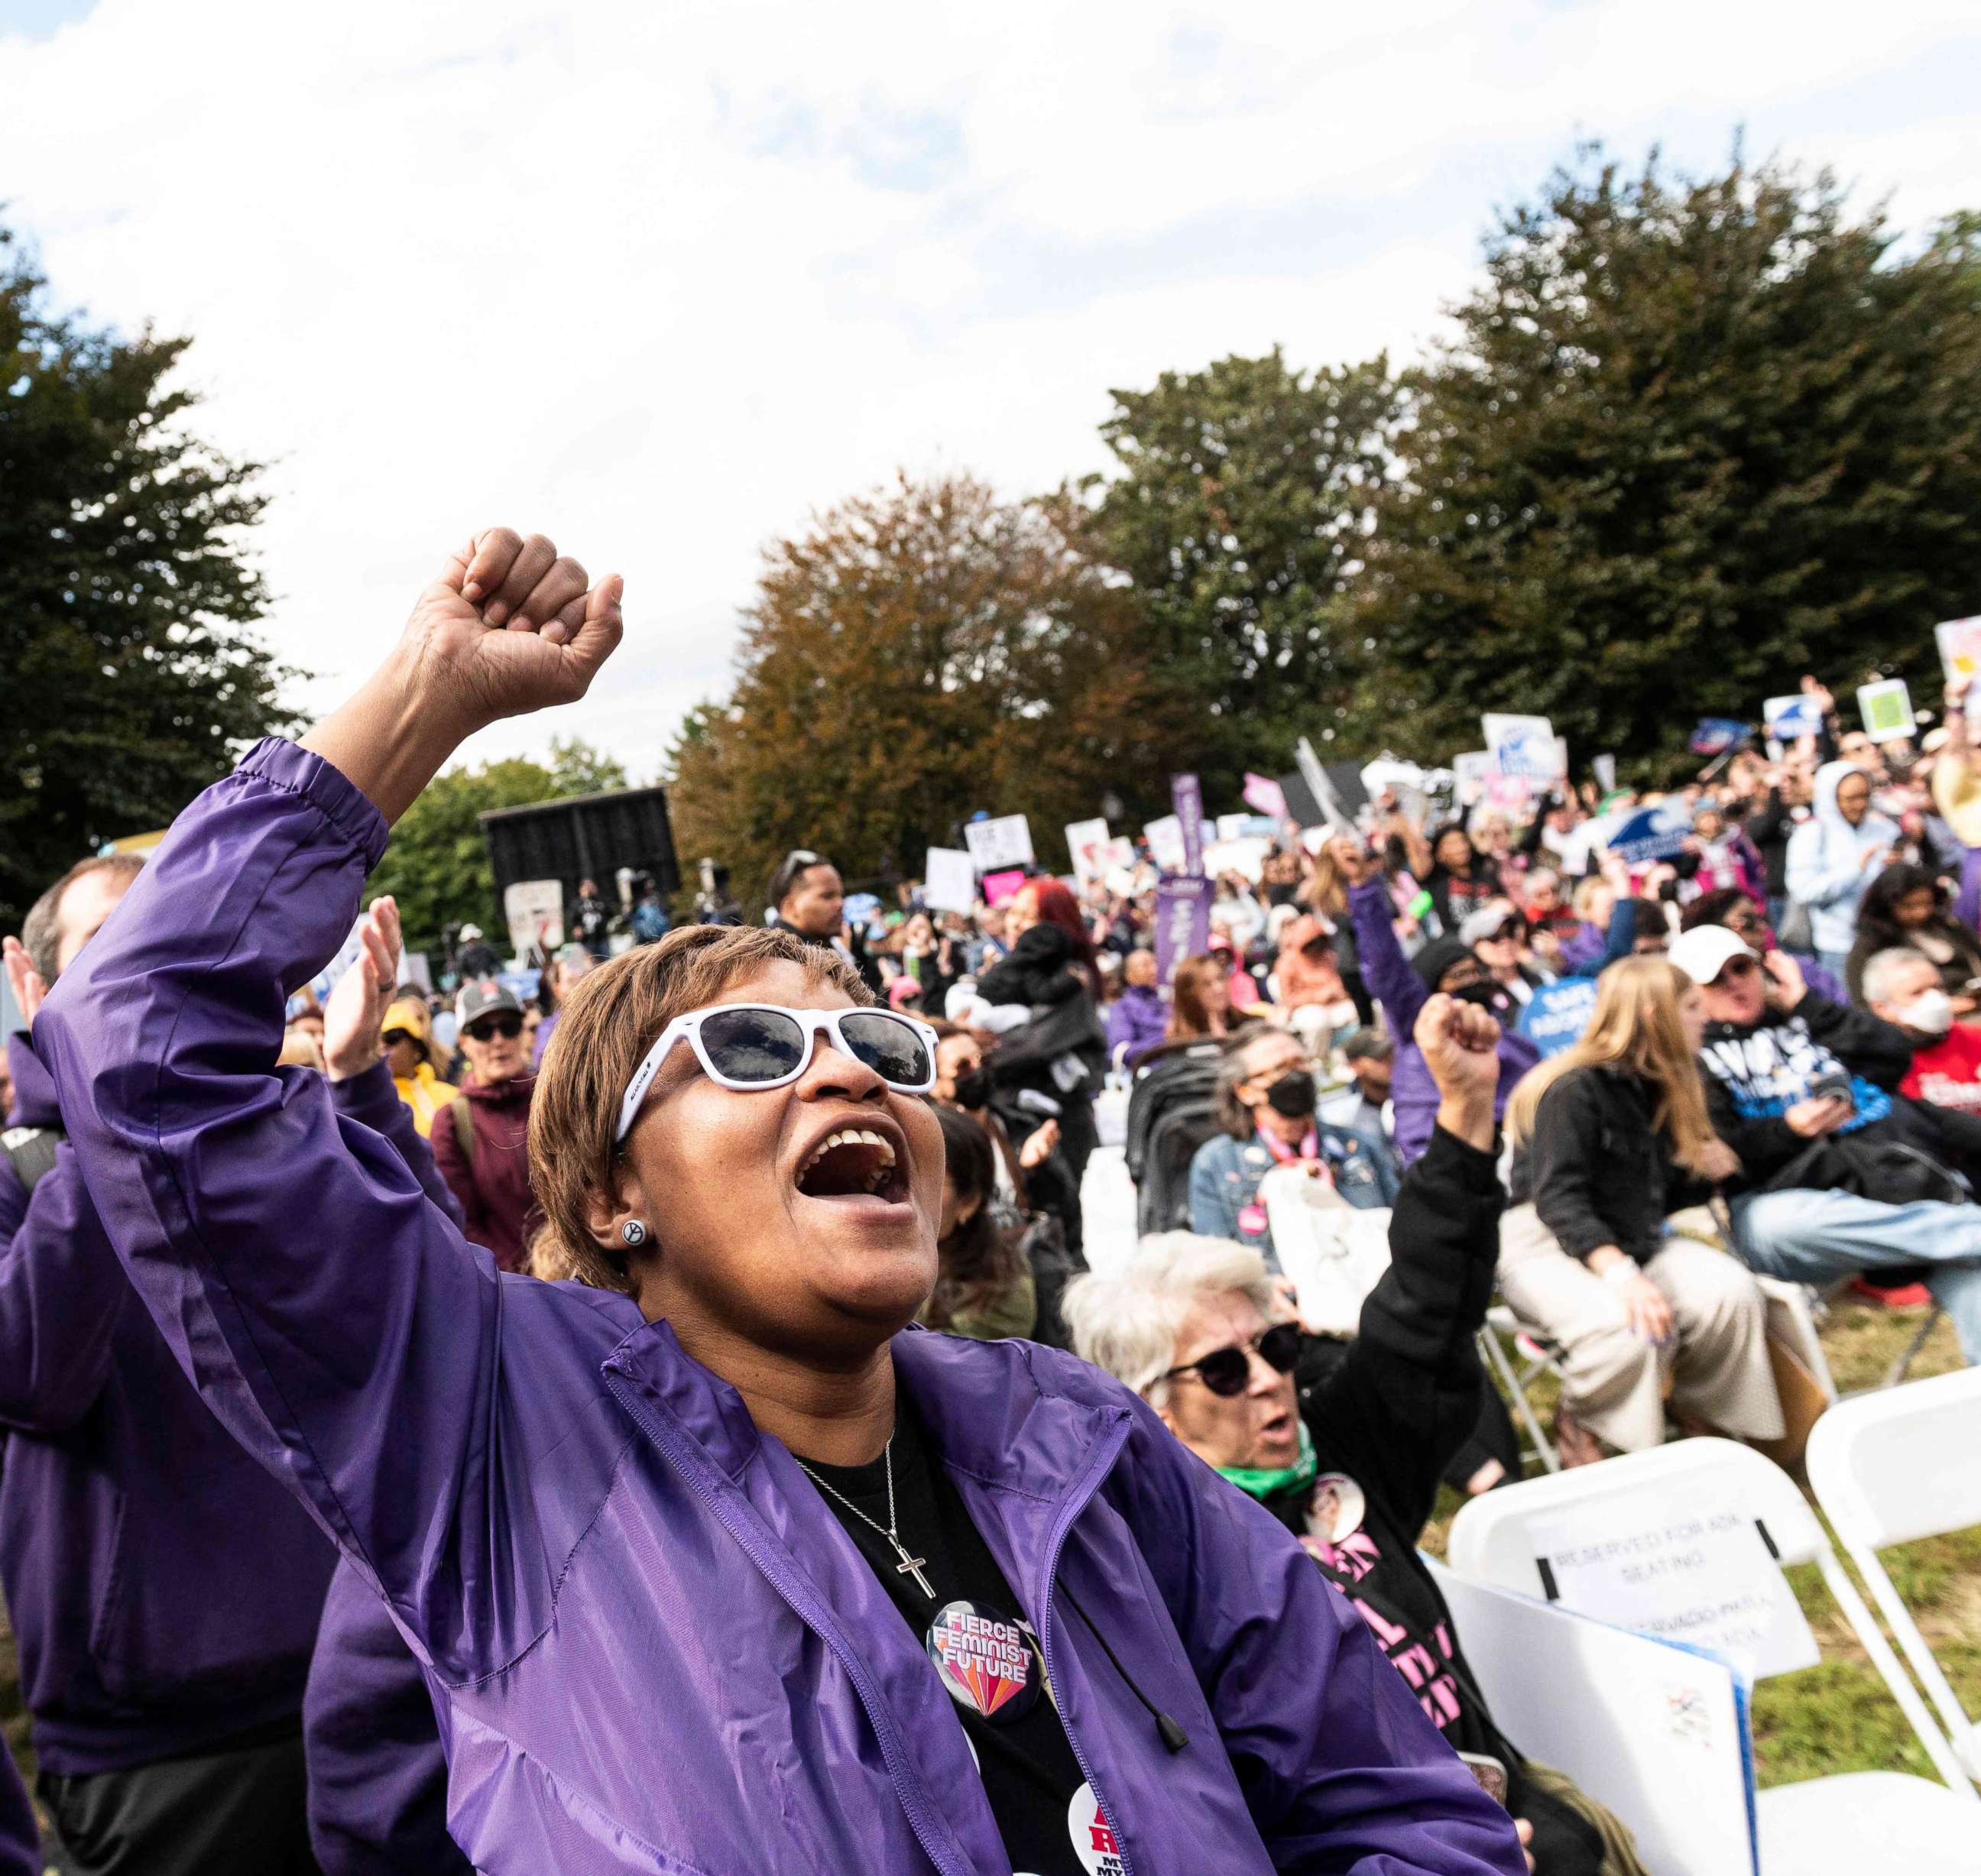 PHOTO: A woman shouts during the annual Women's March to support Women's Rights in Washington, D.C, Oct. 8, 2022.